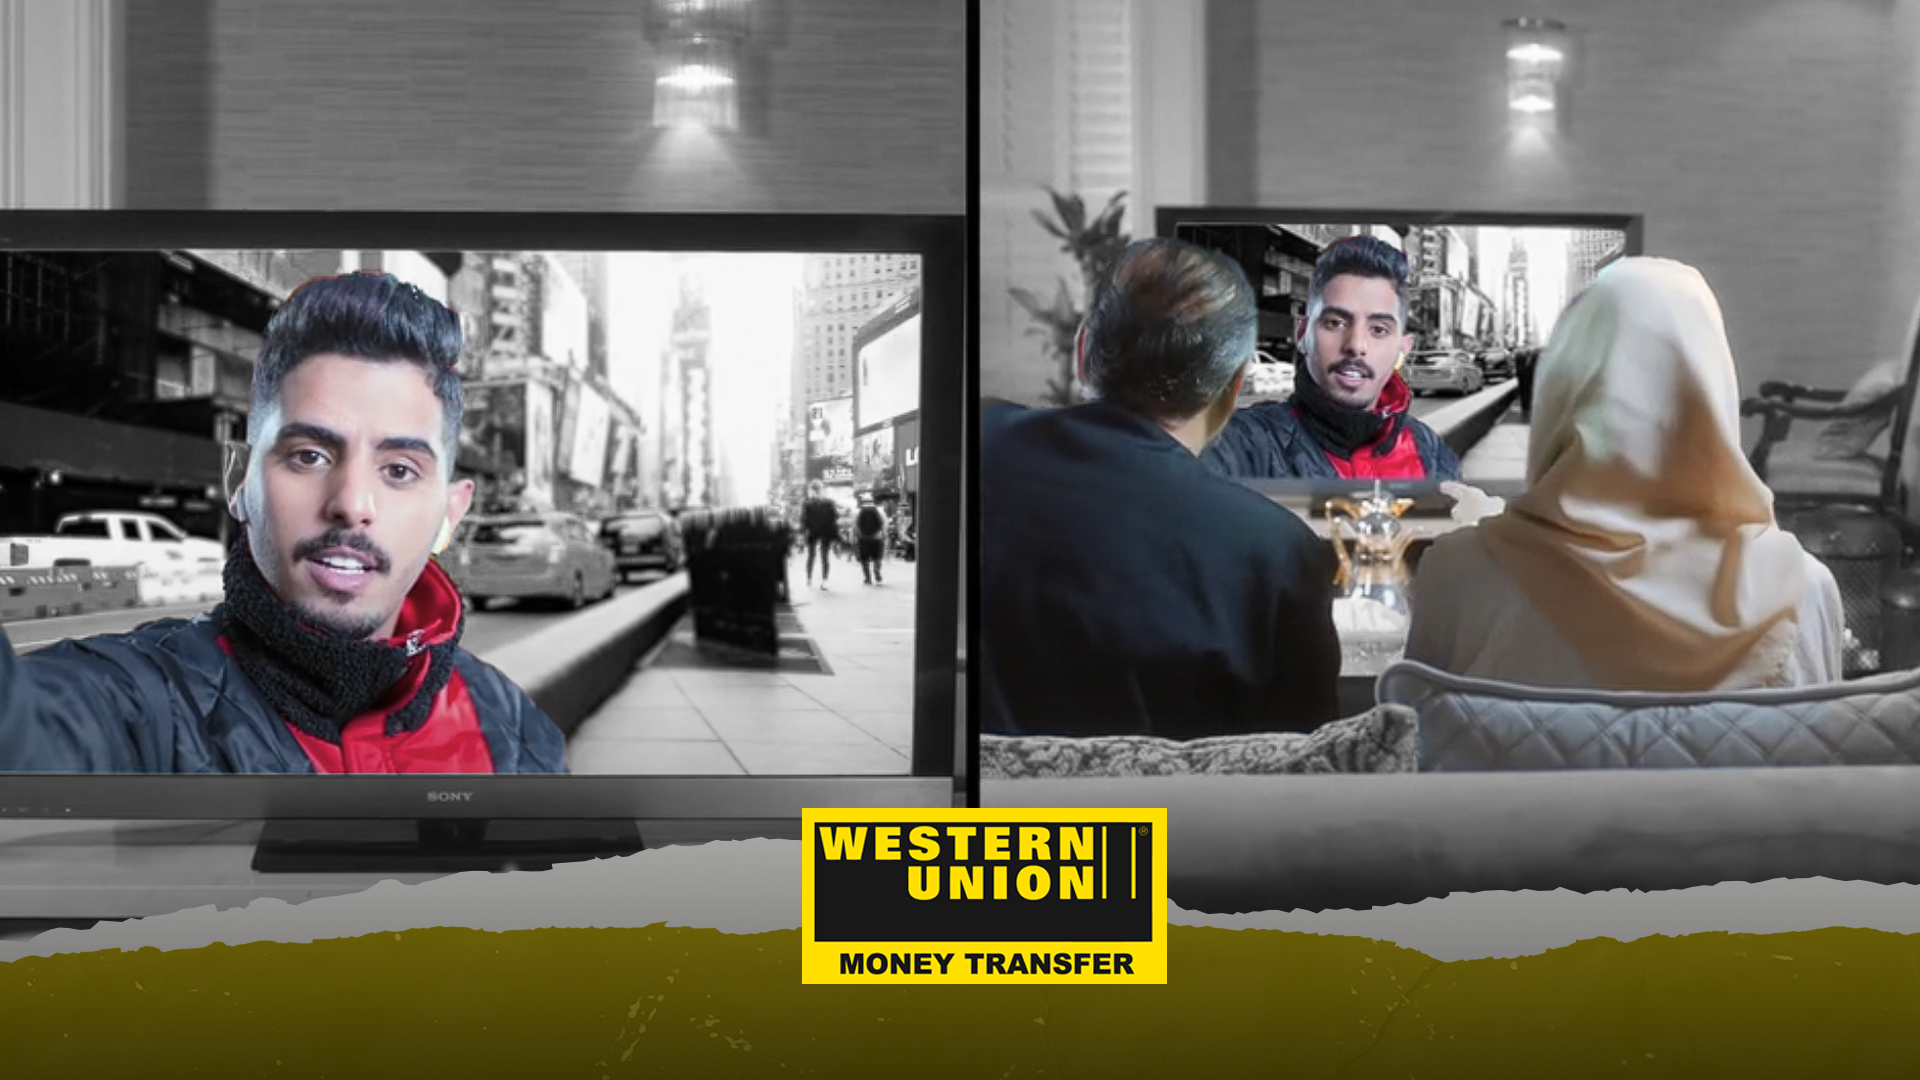 Western union Commercial 